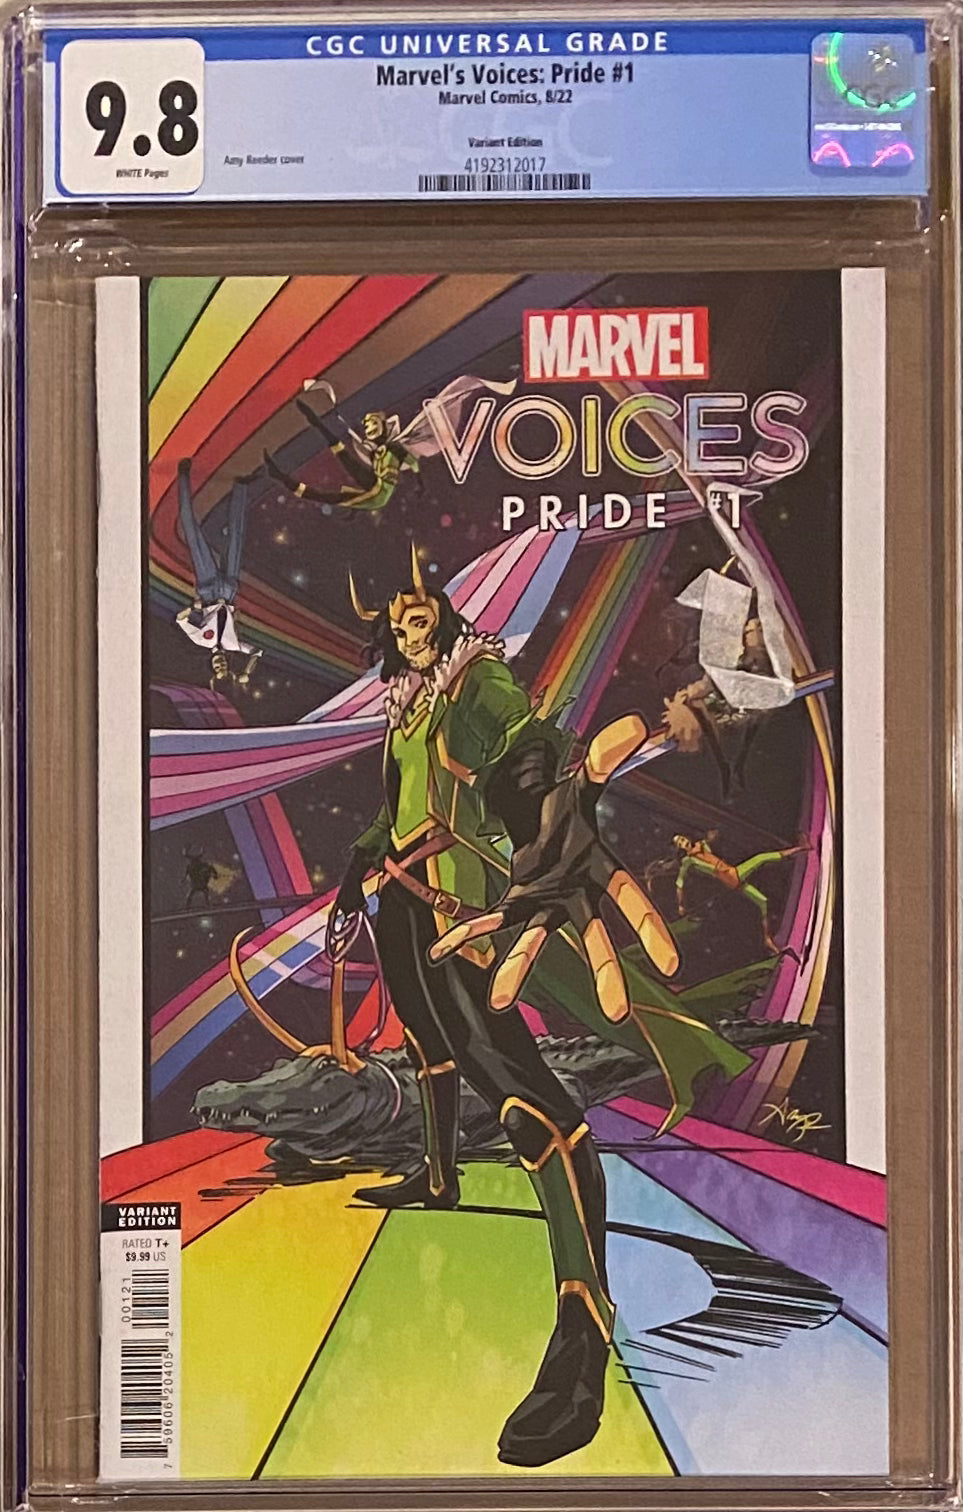 Marvel Voices: Pride #1 Reeder Variant CGC 9.8 - First appearance Escapade